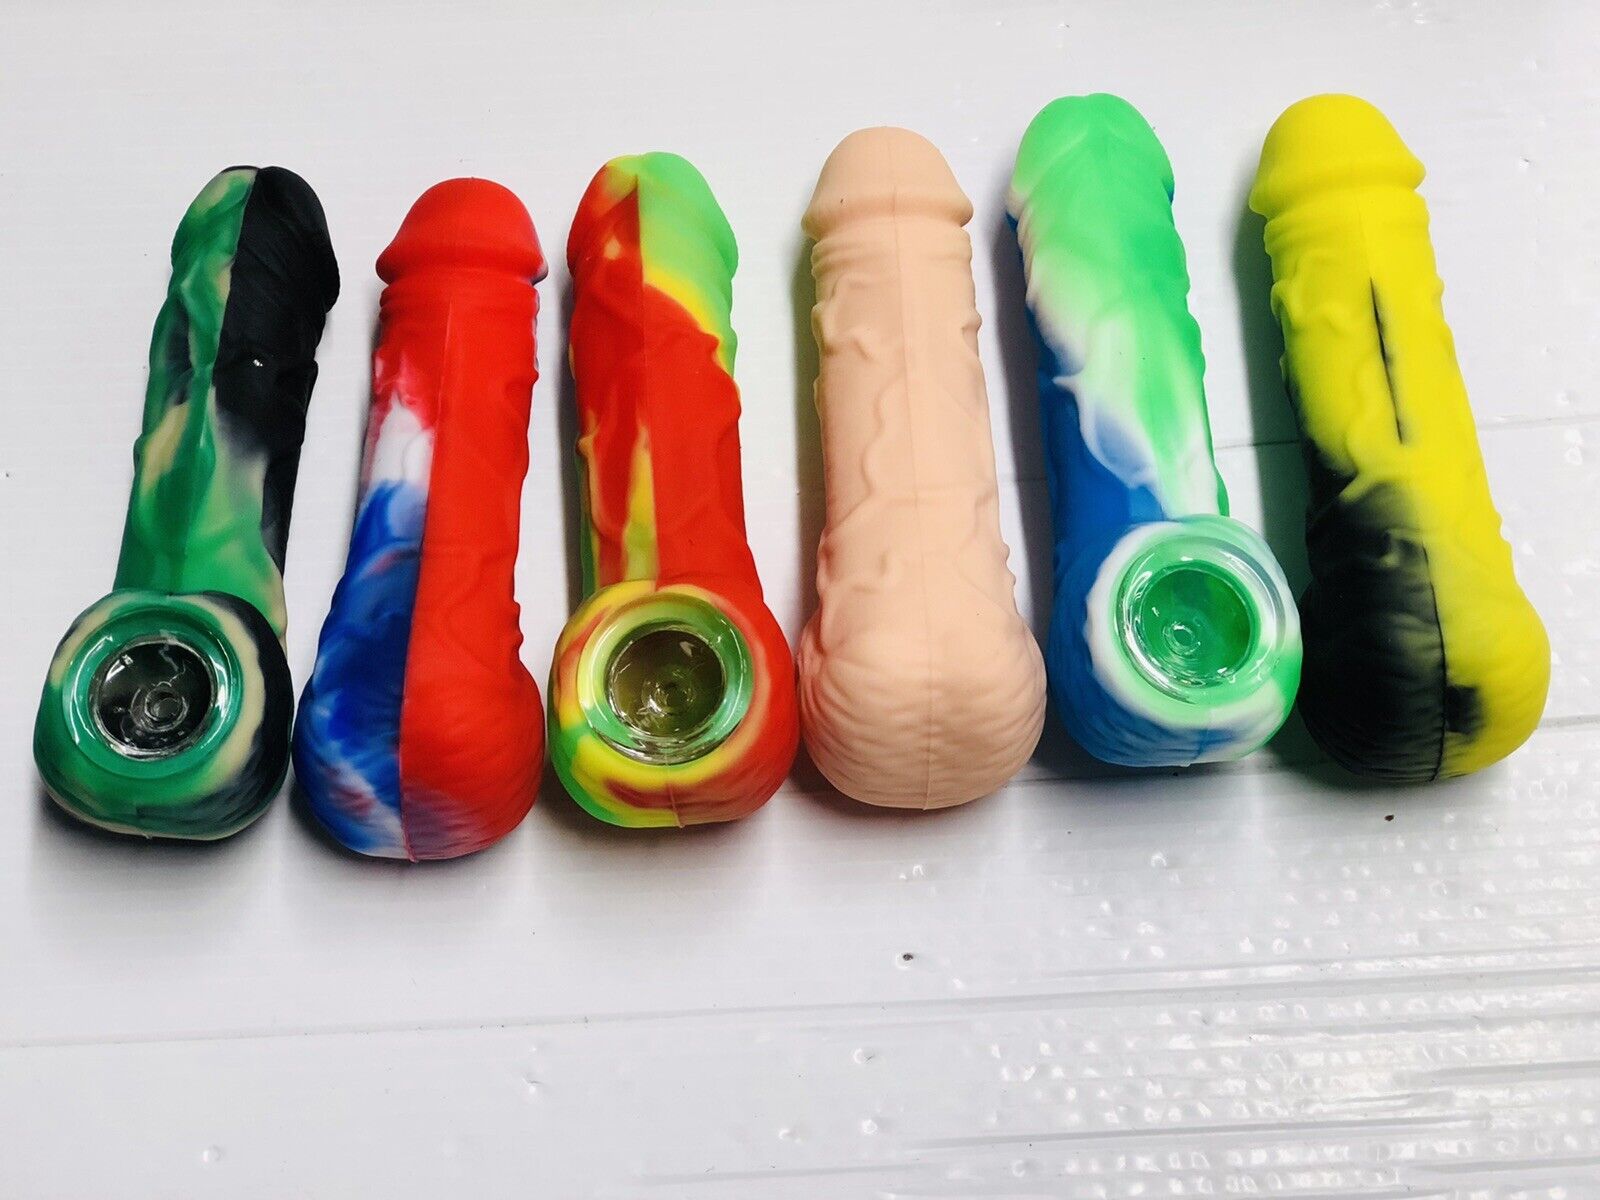 New 4 Inch Penis Design Silicone Pipe Tobacco Pipe Dick Pipe Buy 2 Get 2 Free